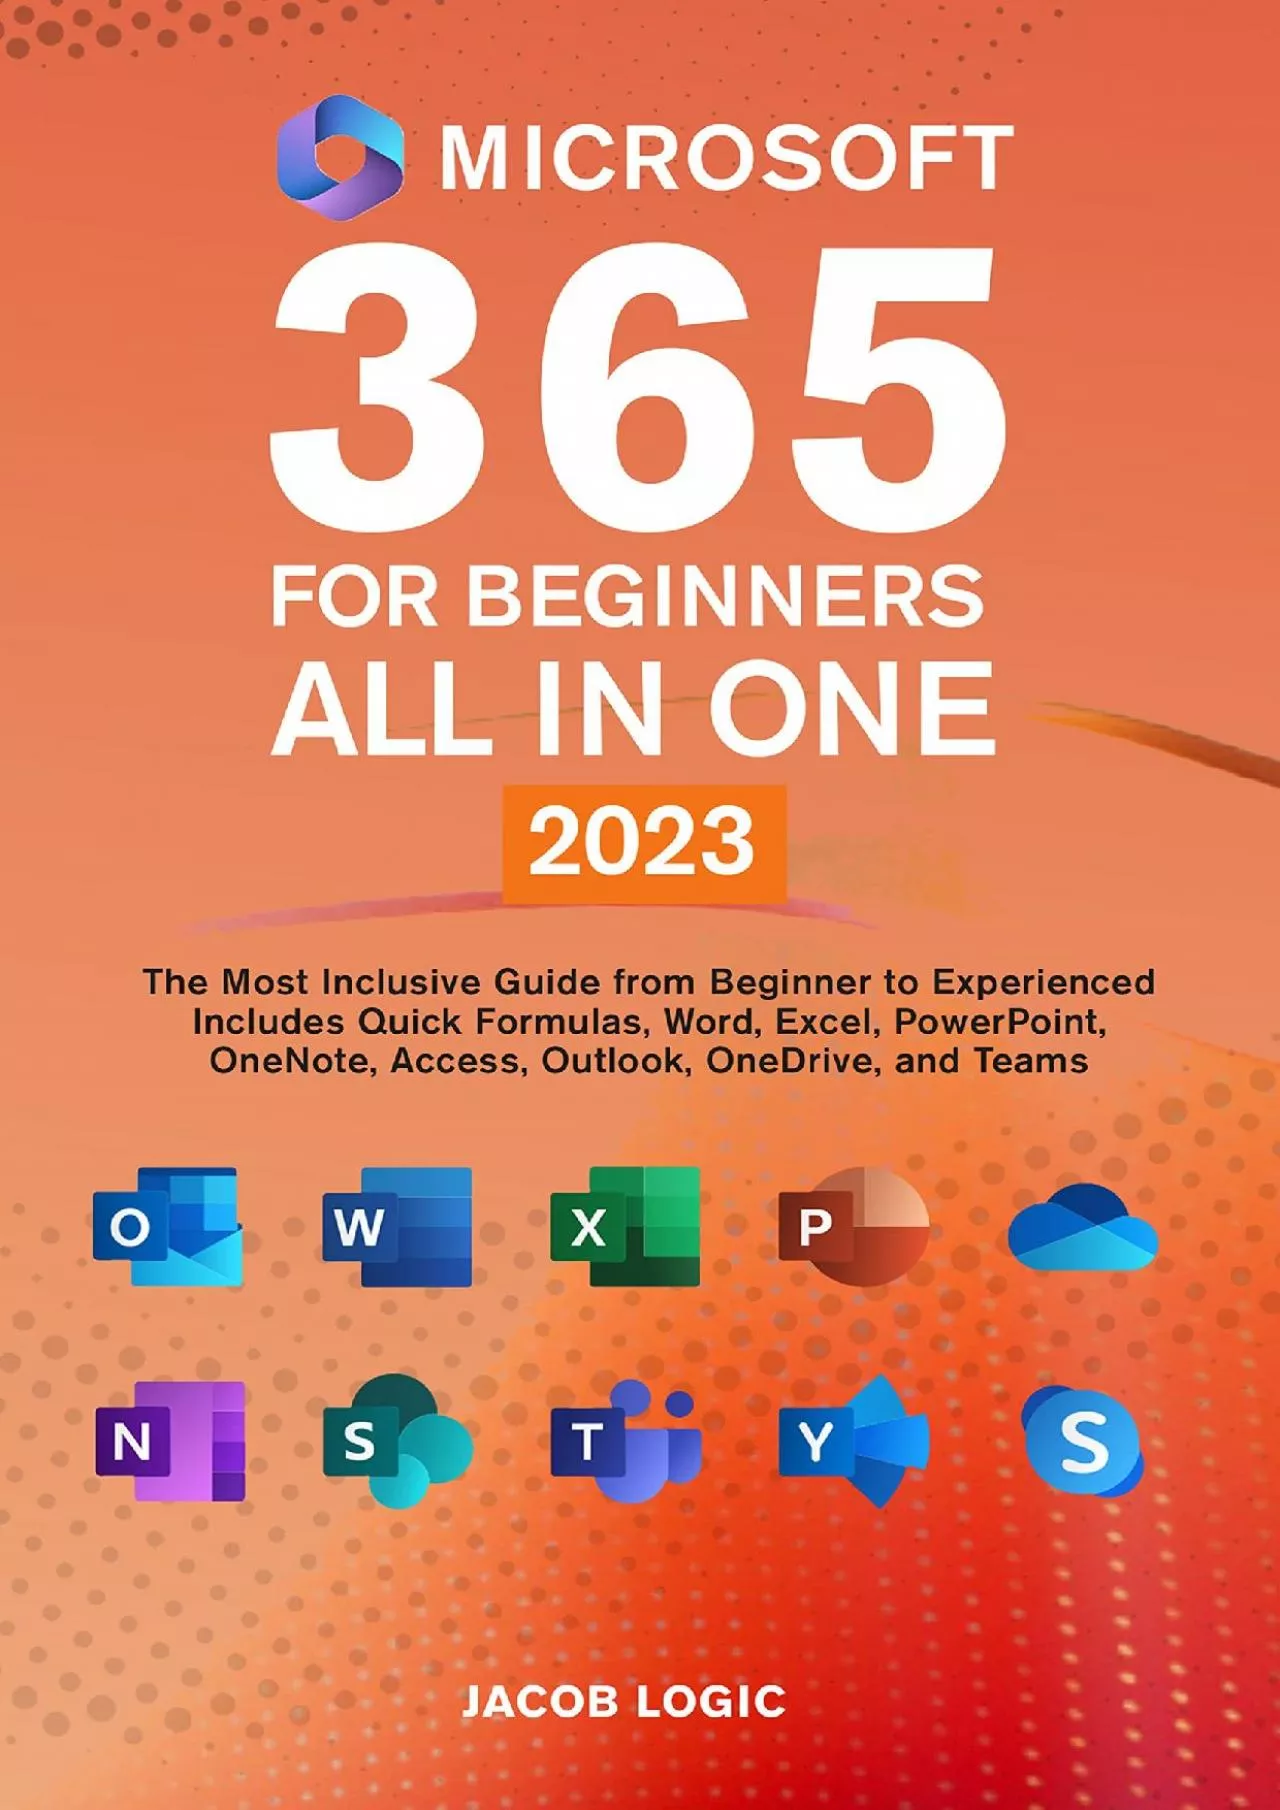 Microsoft 365 for Beginners All in One 2023: The Most Inclusive Guide from Beginner to